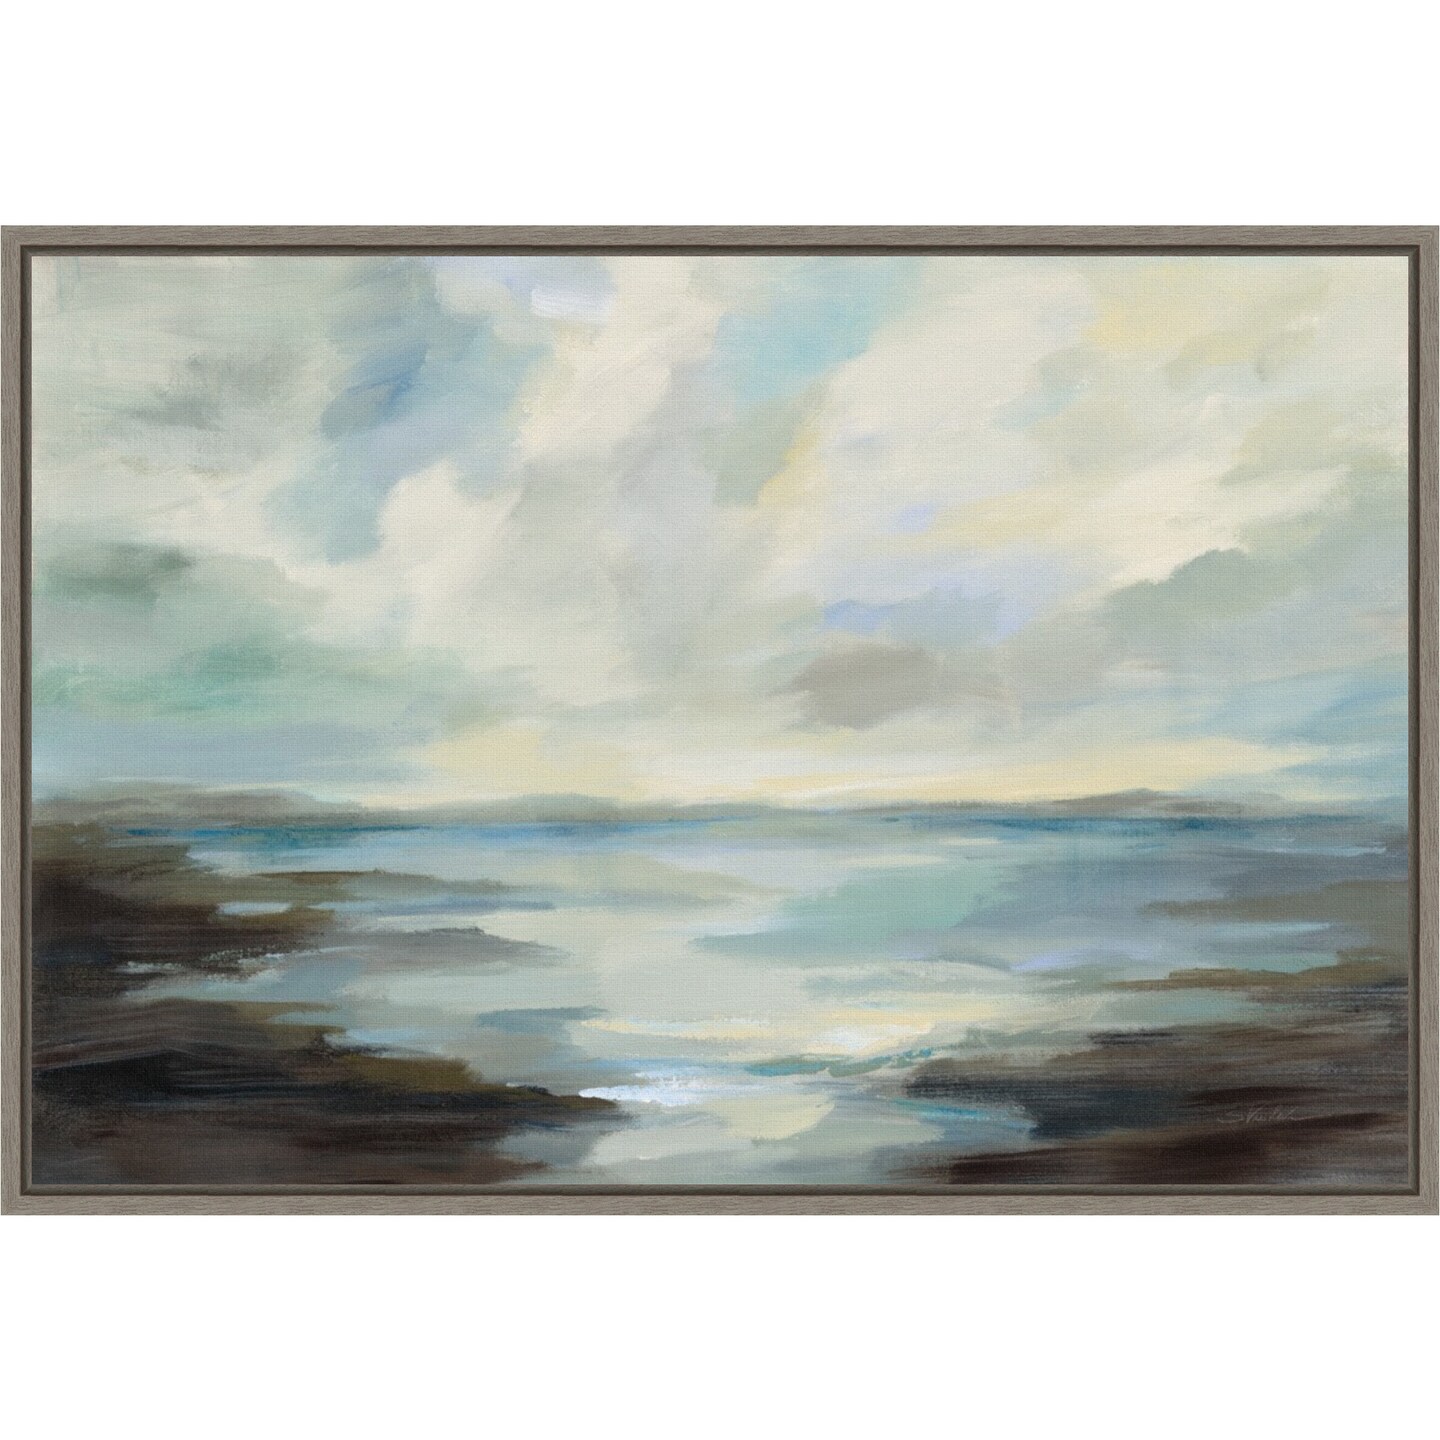 Northern Lagoon by Silvia Vassileva 23-in. W x 16-in. H. Canvas Wall Art Print Framed in Grey